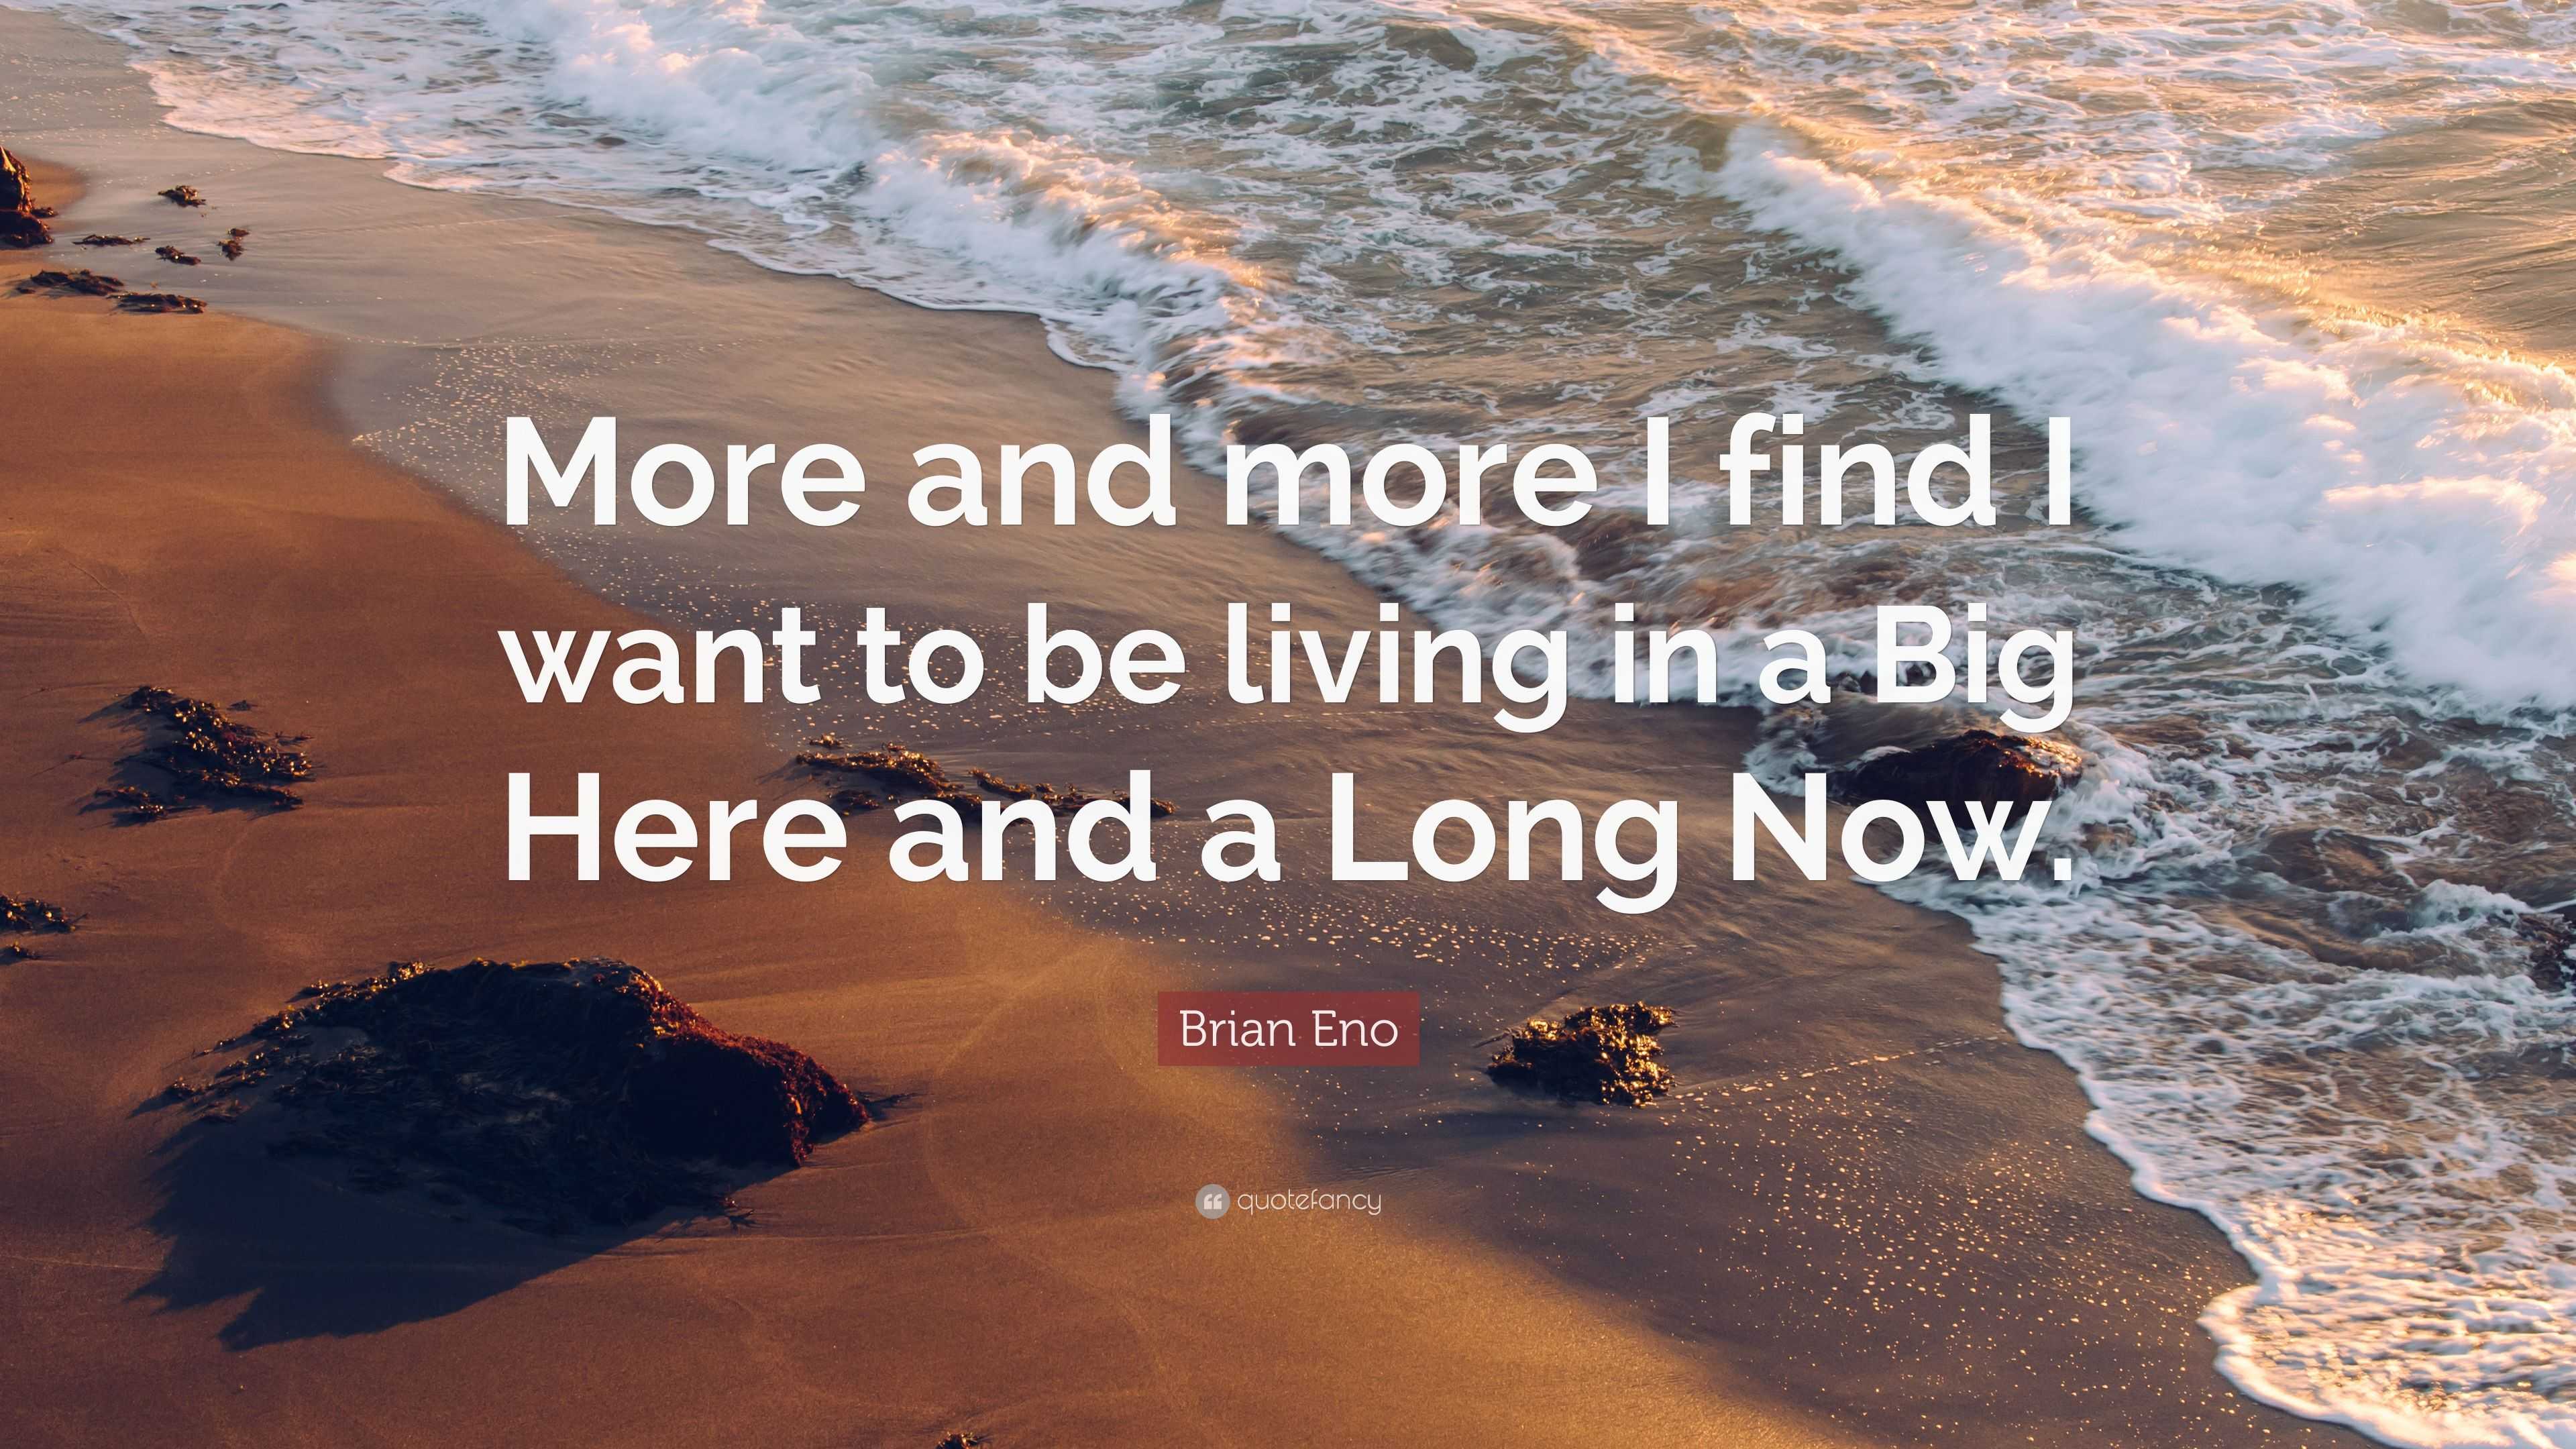 Brian Eno Quote: “More and more I find I want to be living in a Big ...